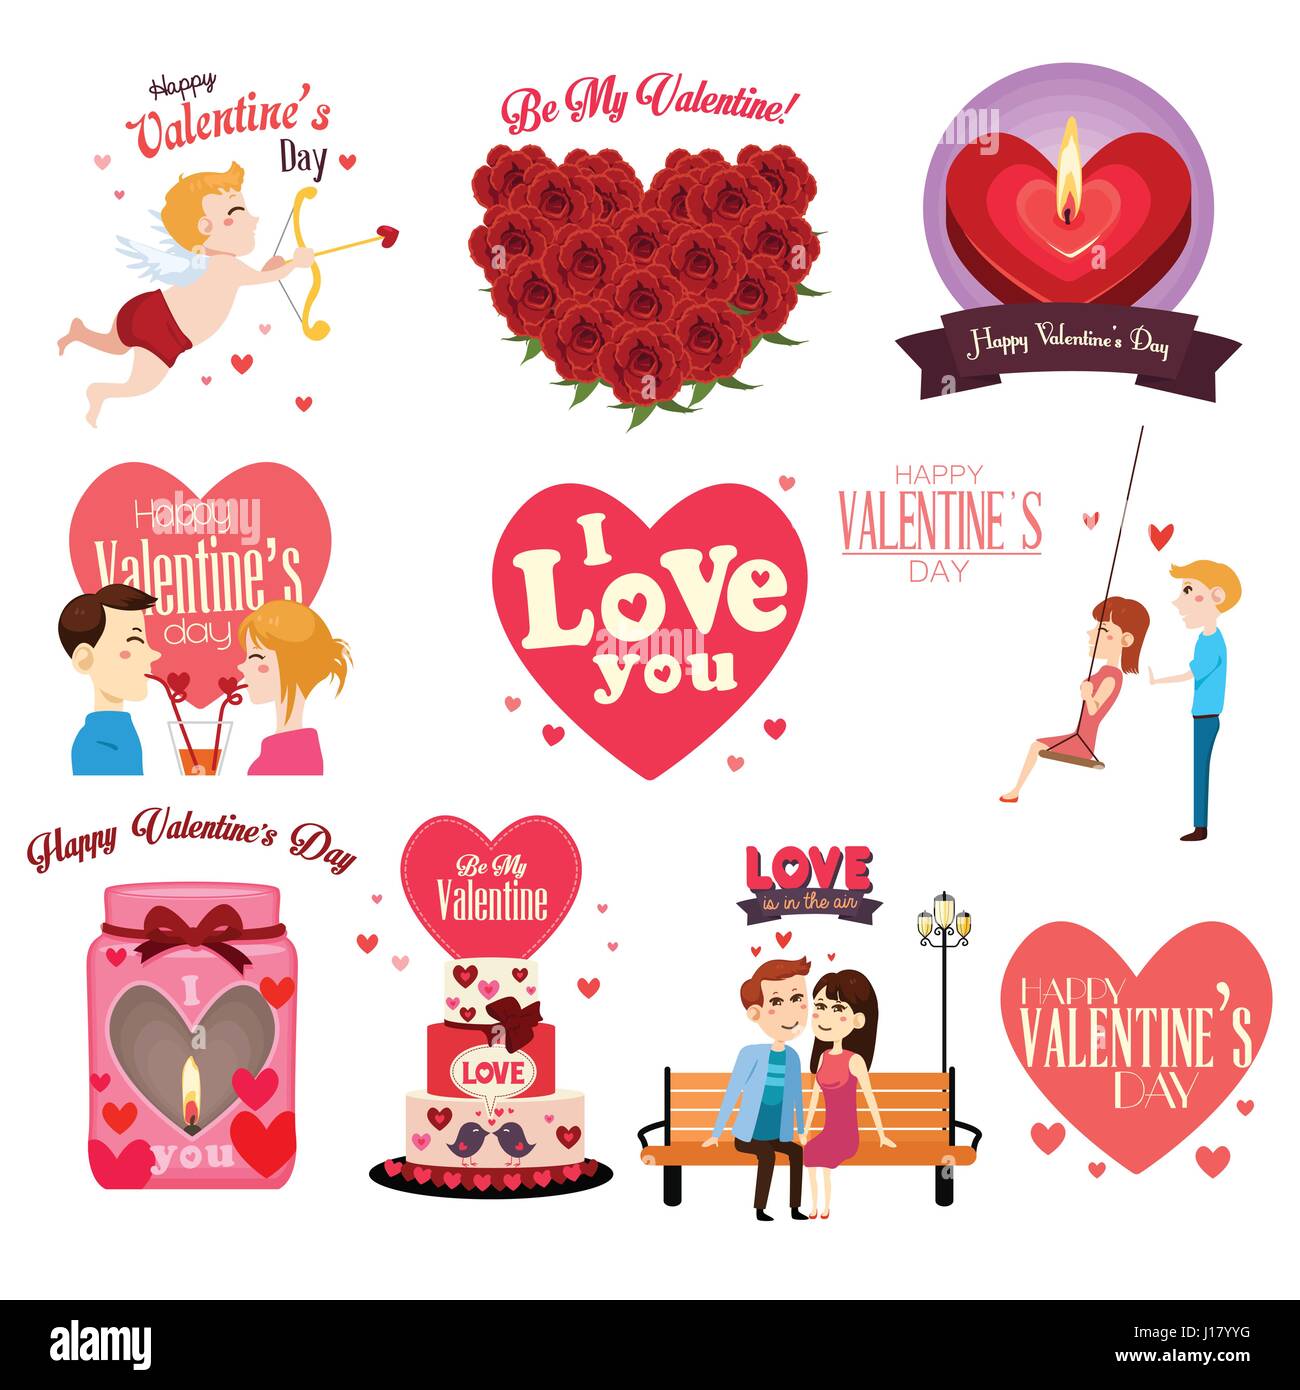 Valentines day clipart Stock Vector Images - Alamy